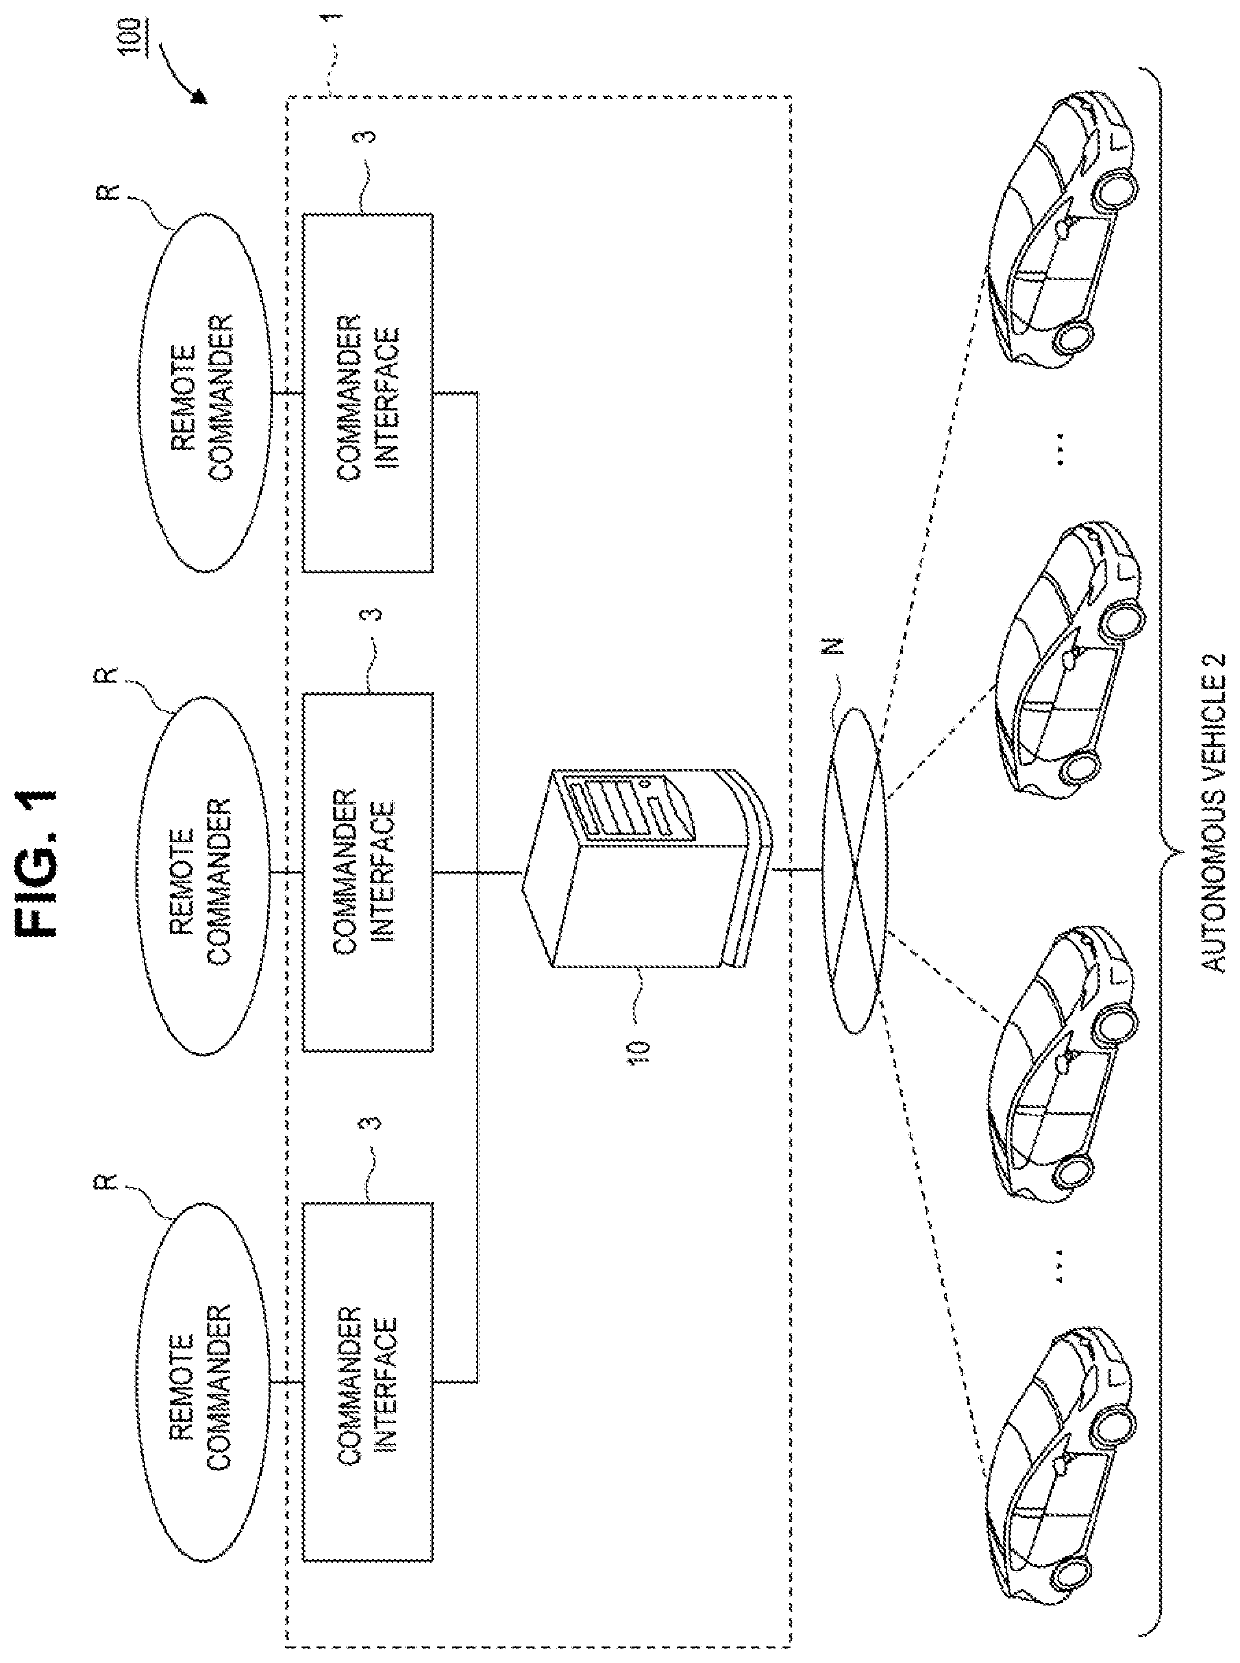 Vehicle remote instruction system and remote instruction device